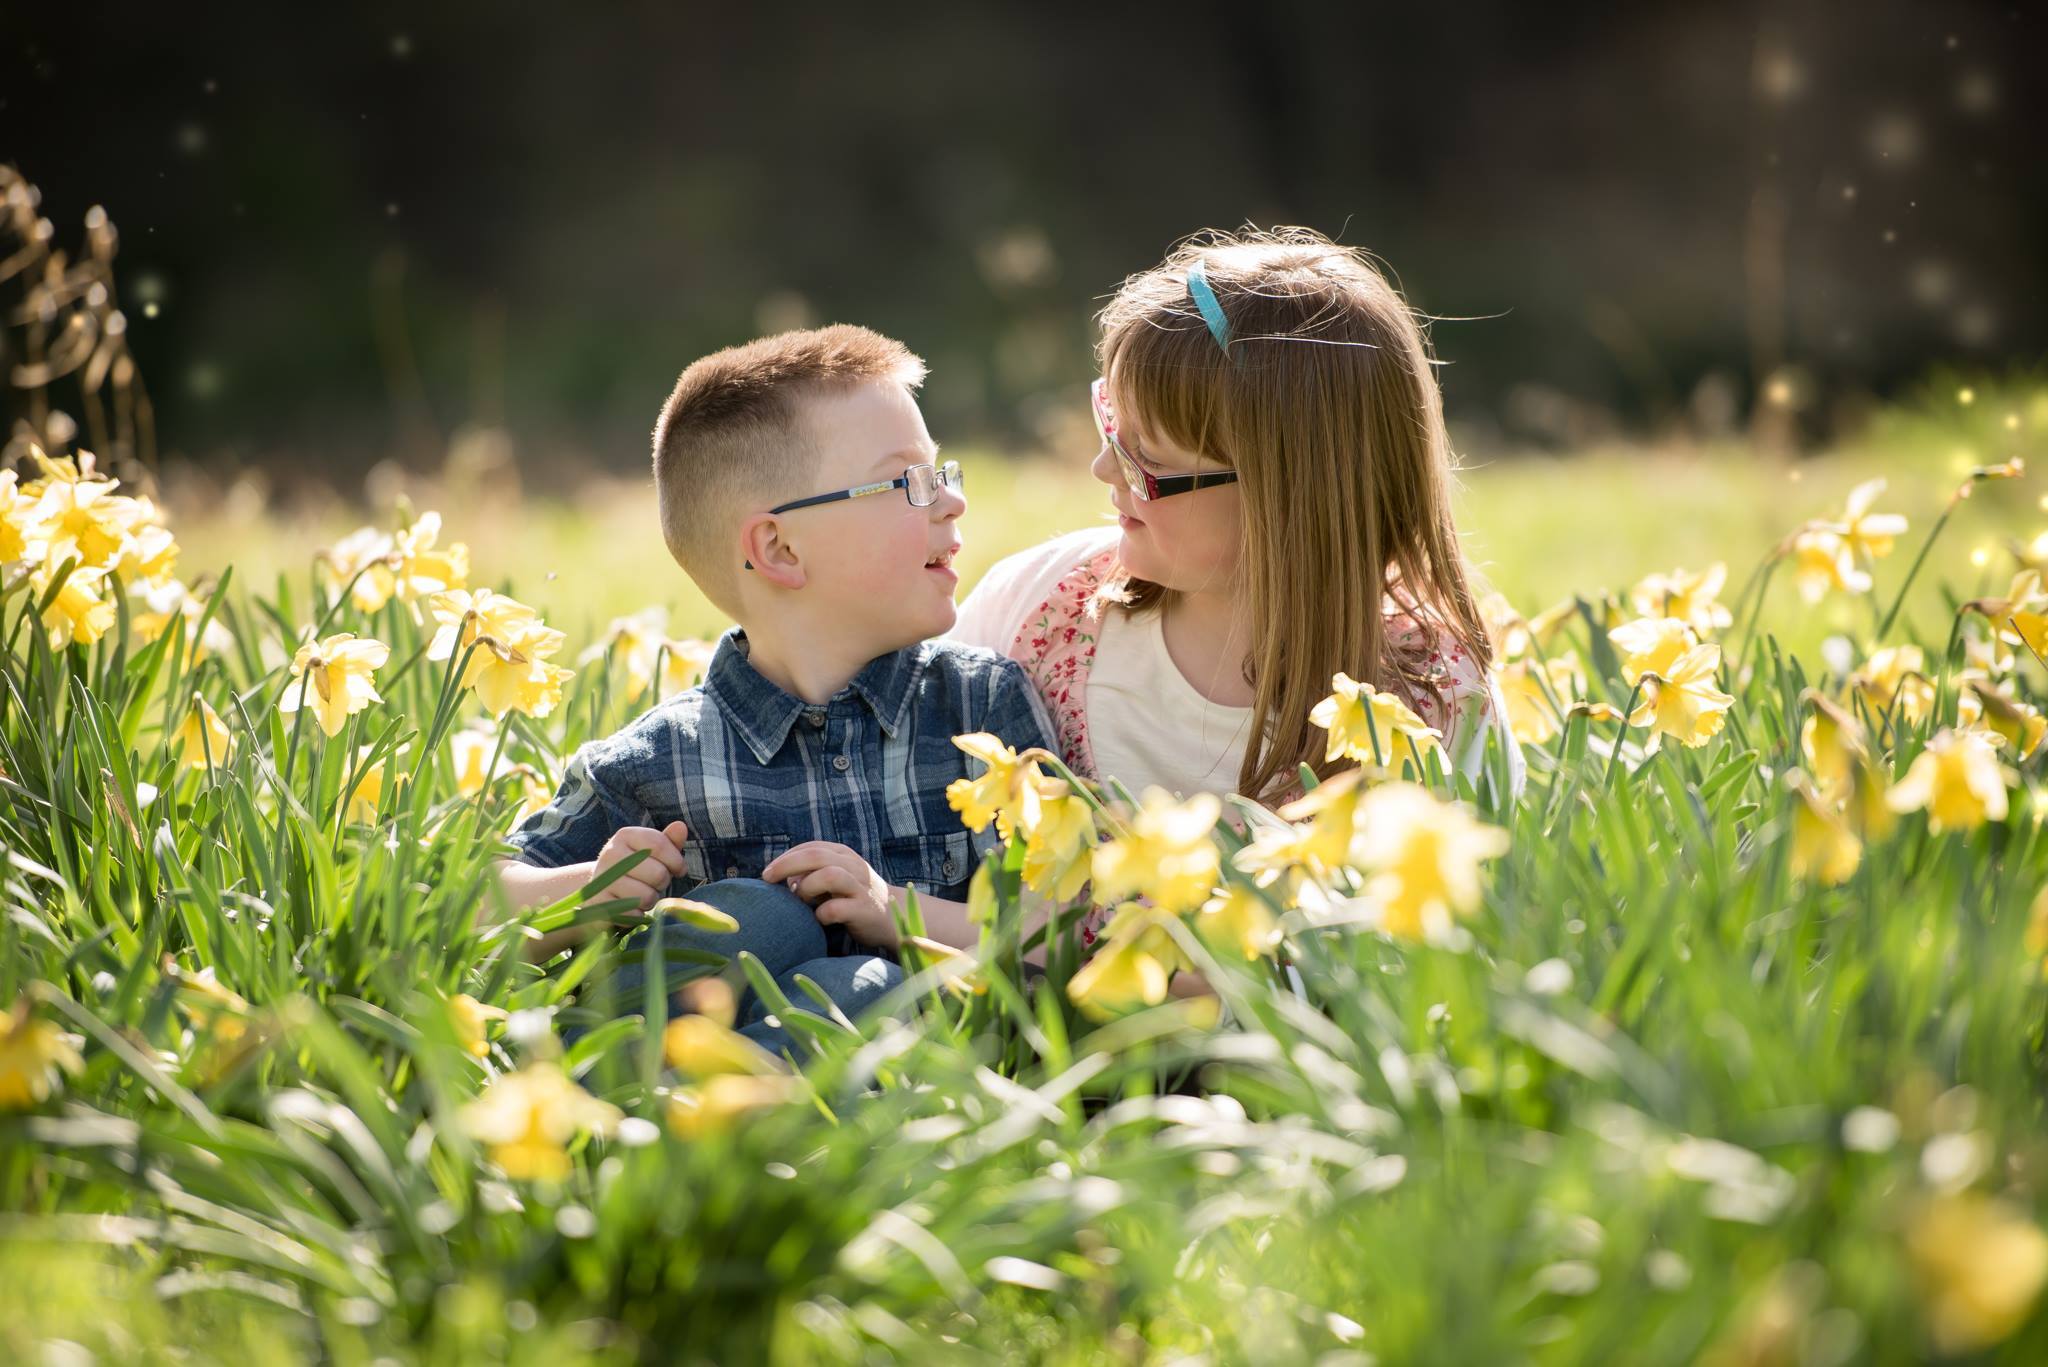 Family photographer in Edinburgh - Family photograph of brother and sister in the daffodils at Lauriston Castle in Edinburgh